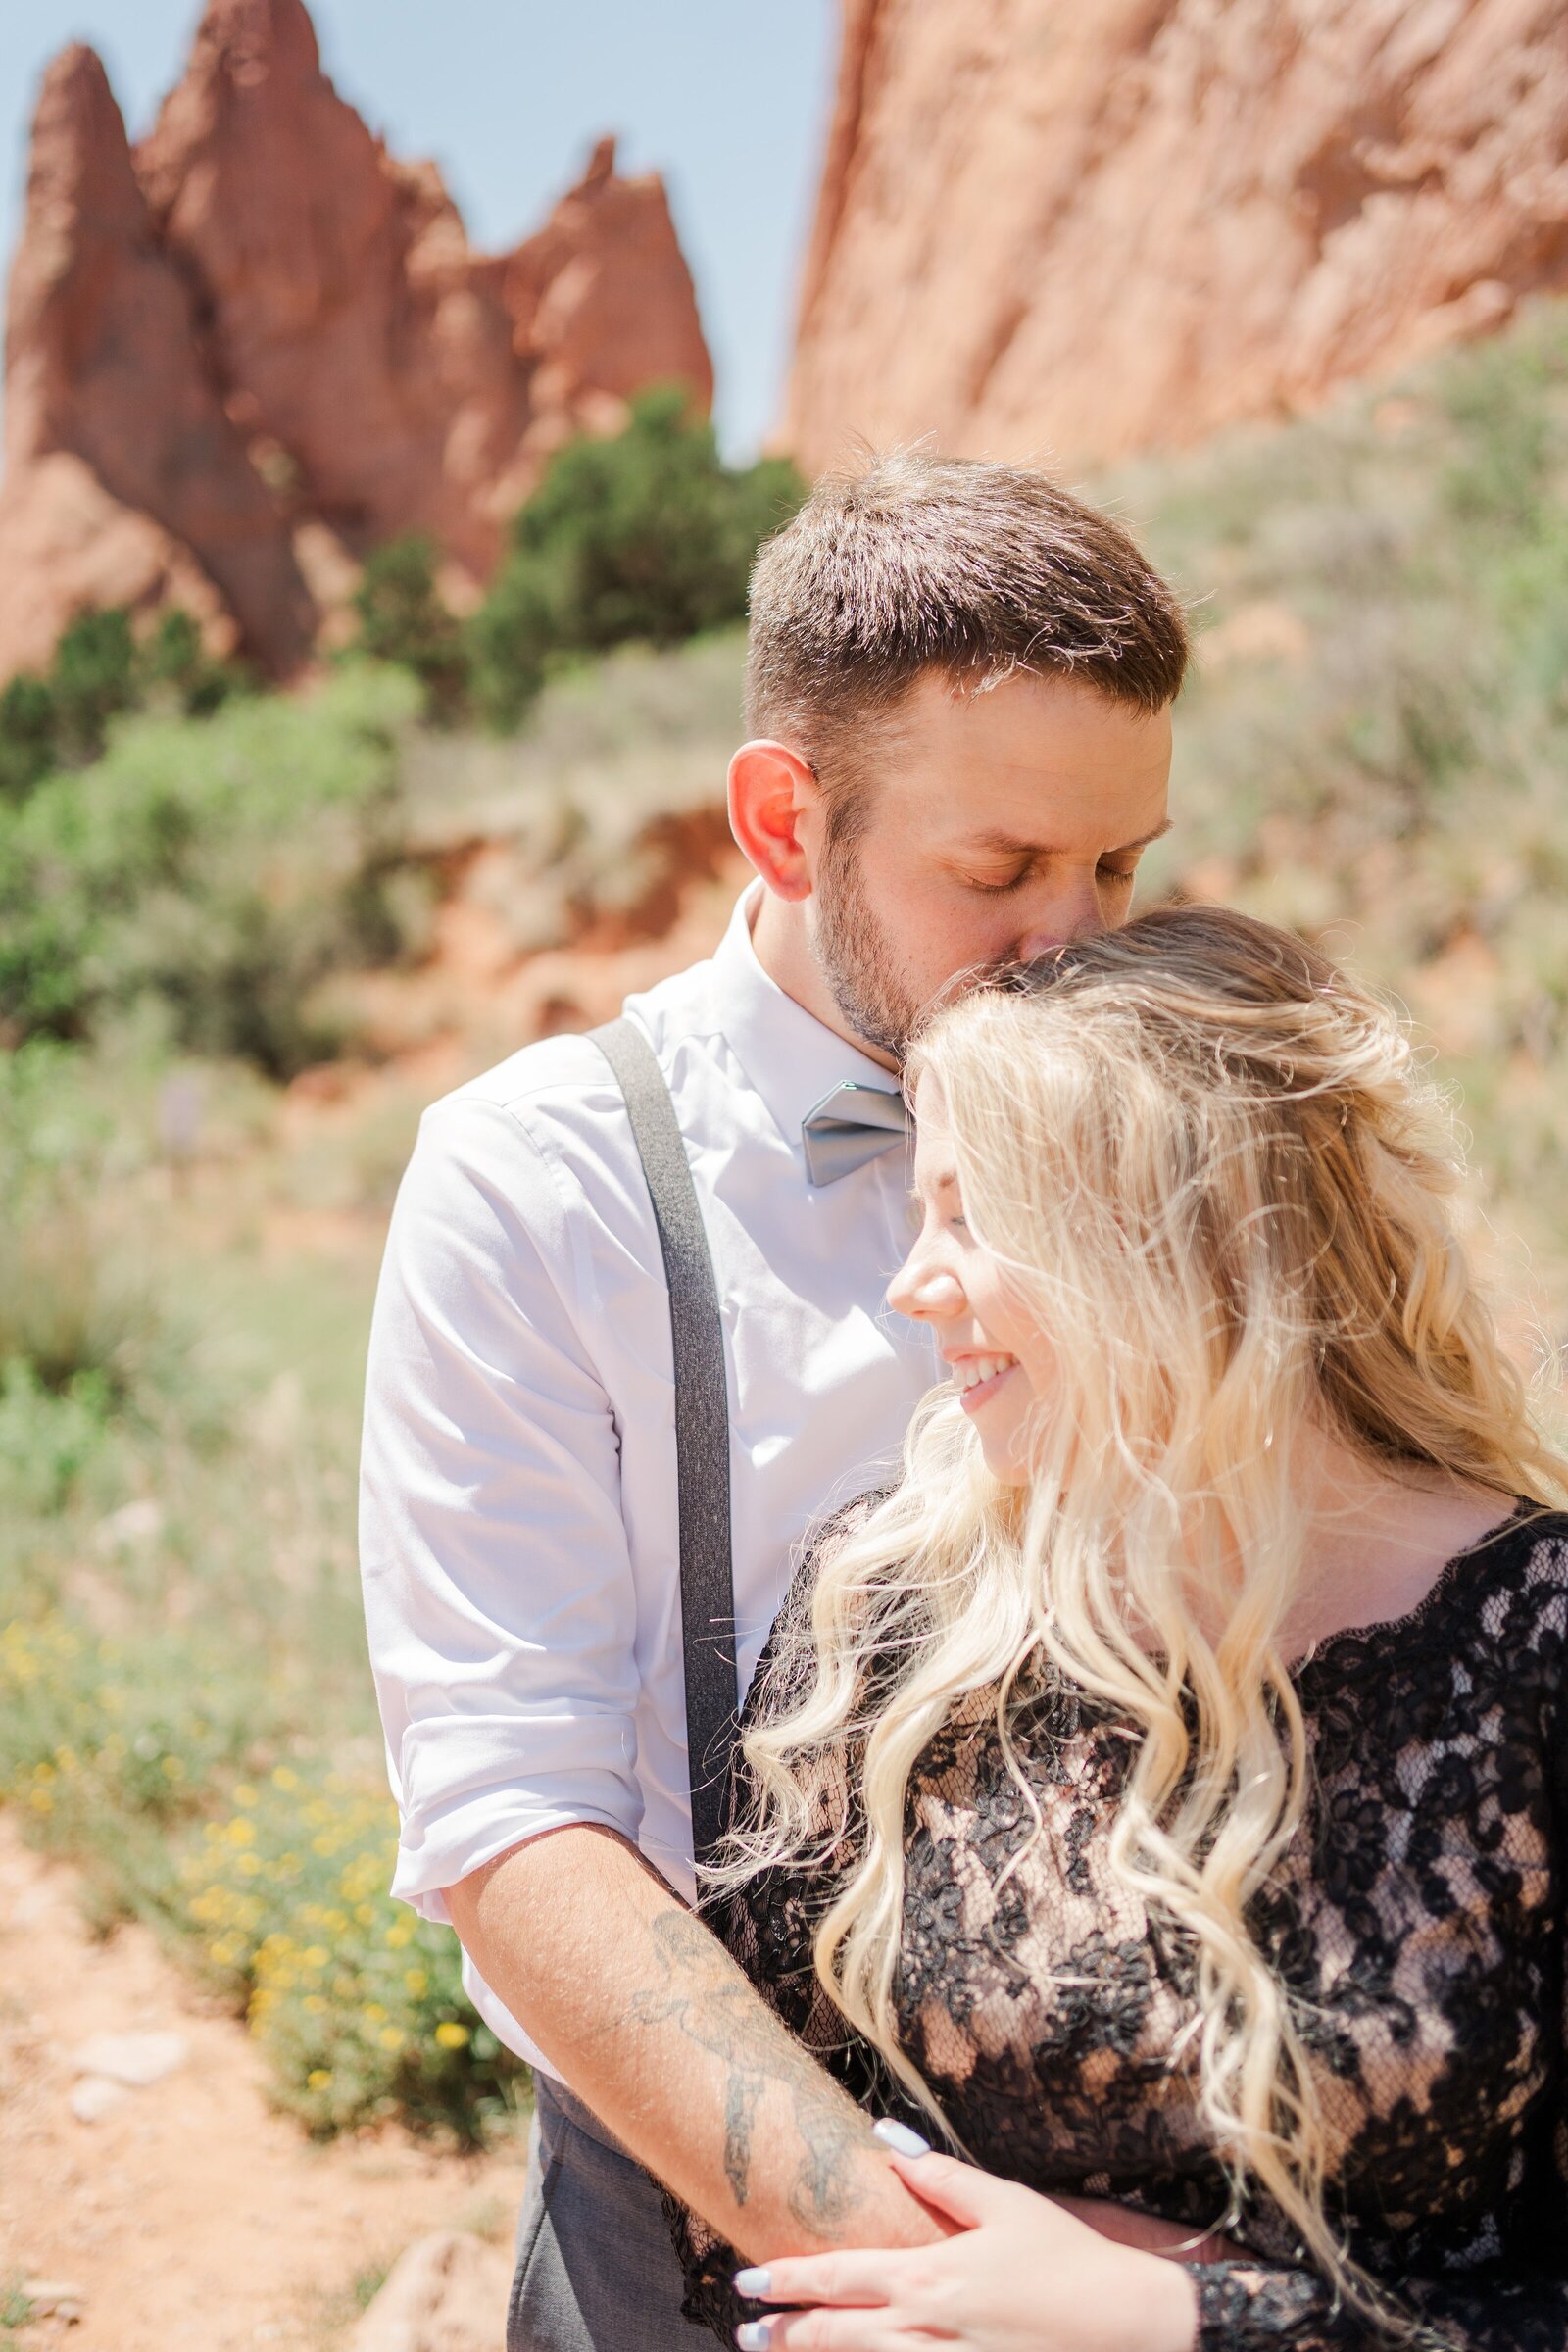 Personalized and Meaningful Elopement Photography" - Capture the essence of your love story with personalized photography that reflects your unique personalities and relationship.